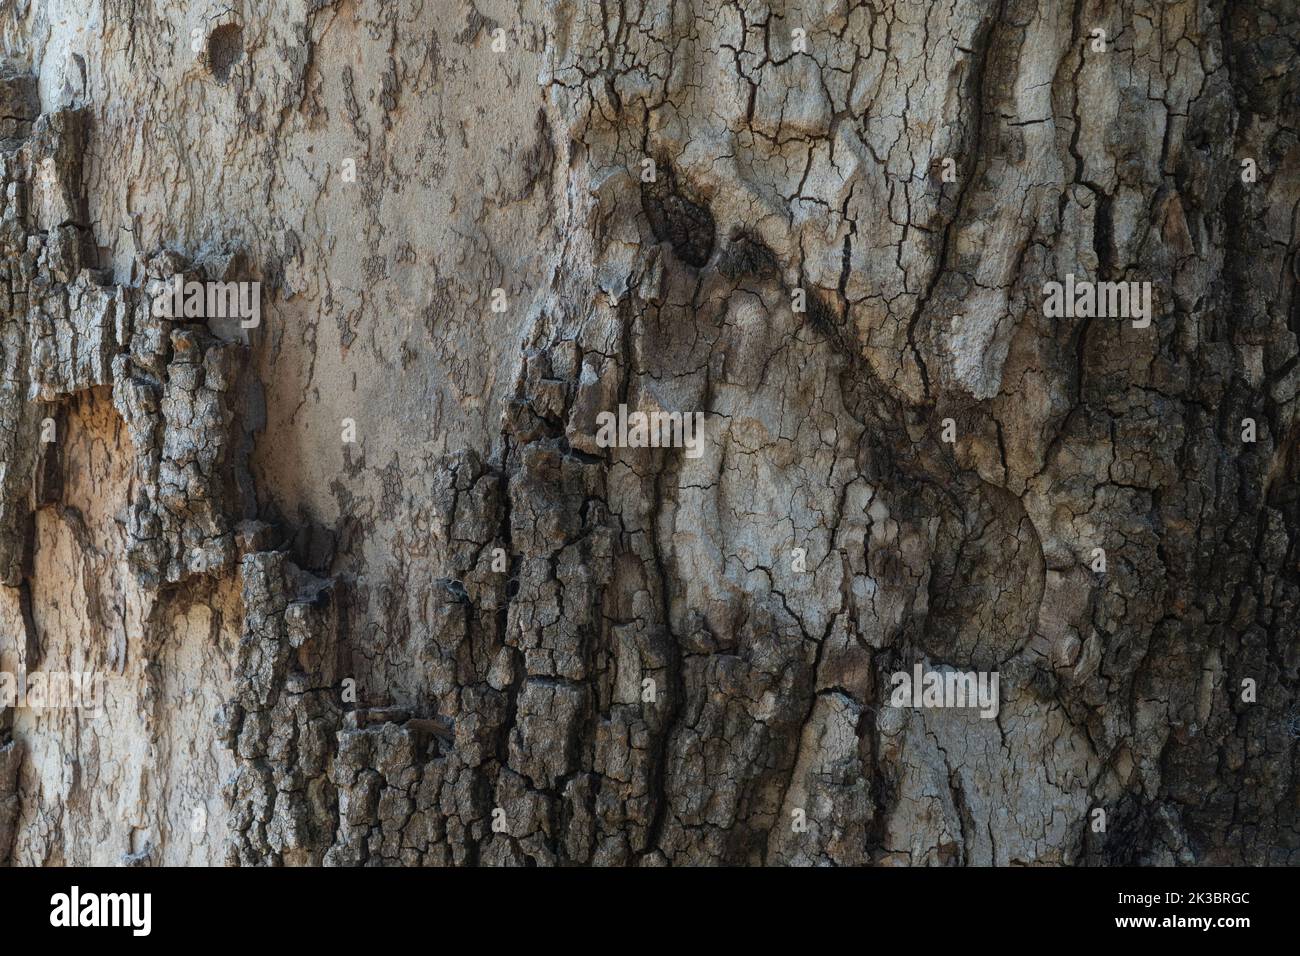 Tree bark background with relief and texture Stock Photo